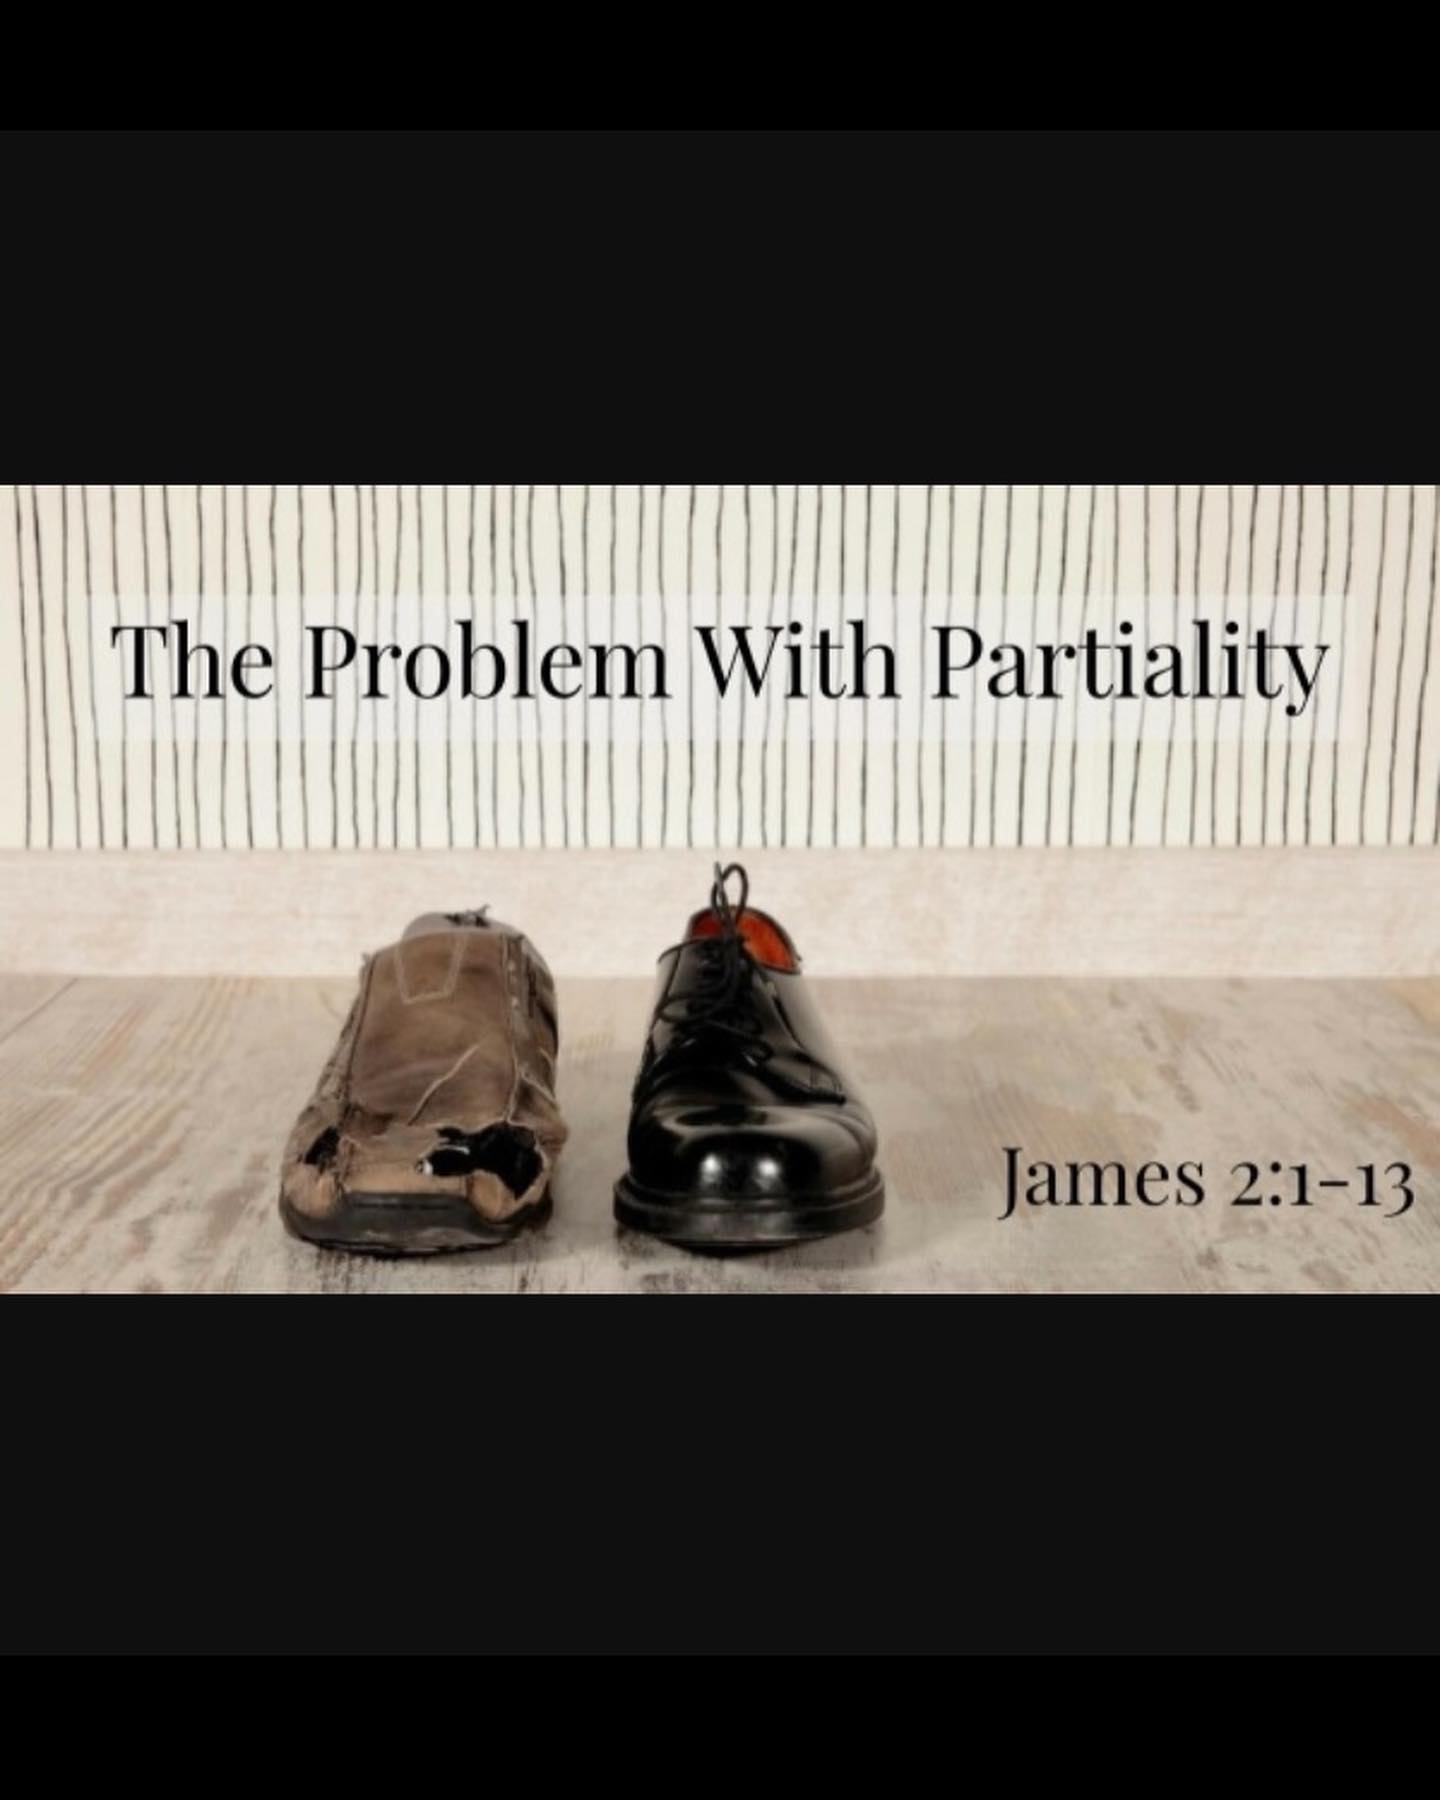 We live in a divided world of “us” and “them”; of the “haves” and “have nots”. When we allow our differences to influence our attitude, it manifests as partiality or prejudice in our hearts and our actions. James, the brother of Jesus, gives Christian’s a strong warning of the dangers of favoritism in the church. James reminds of God’s loving mercy toward us, regardless of our economic status. And how this should compel us to show mercy to others, regardless of theirs. Join us Sunday 10AM @fallbrookvineyardchurch as we open our Bibles to James 2 and give ourselves a little heart exam, if you will Weather forecast says no rain Sunday morning so, we’re ON for a beautiful morning together! If anything changes, please check here for updates. Bring your Bibles and your friends! #epistleofjames#faithinaction#doersnotjusthearers#favoritism#mercytriumphsoverjustice#thebible#prayer #lifeabundant#community #support #love#familyofgod #outdoorchurch #organicchurch #outlawchurch #dogfriendlychurch#dogchurch#fallbrookvineyardchurch#thevineyard1924